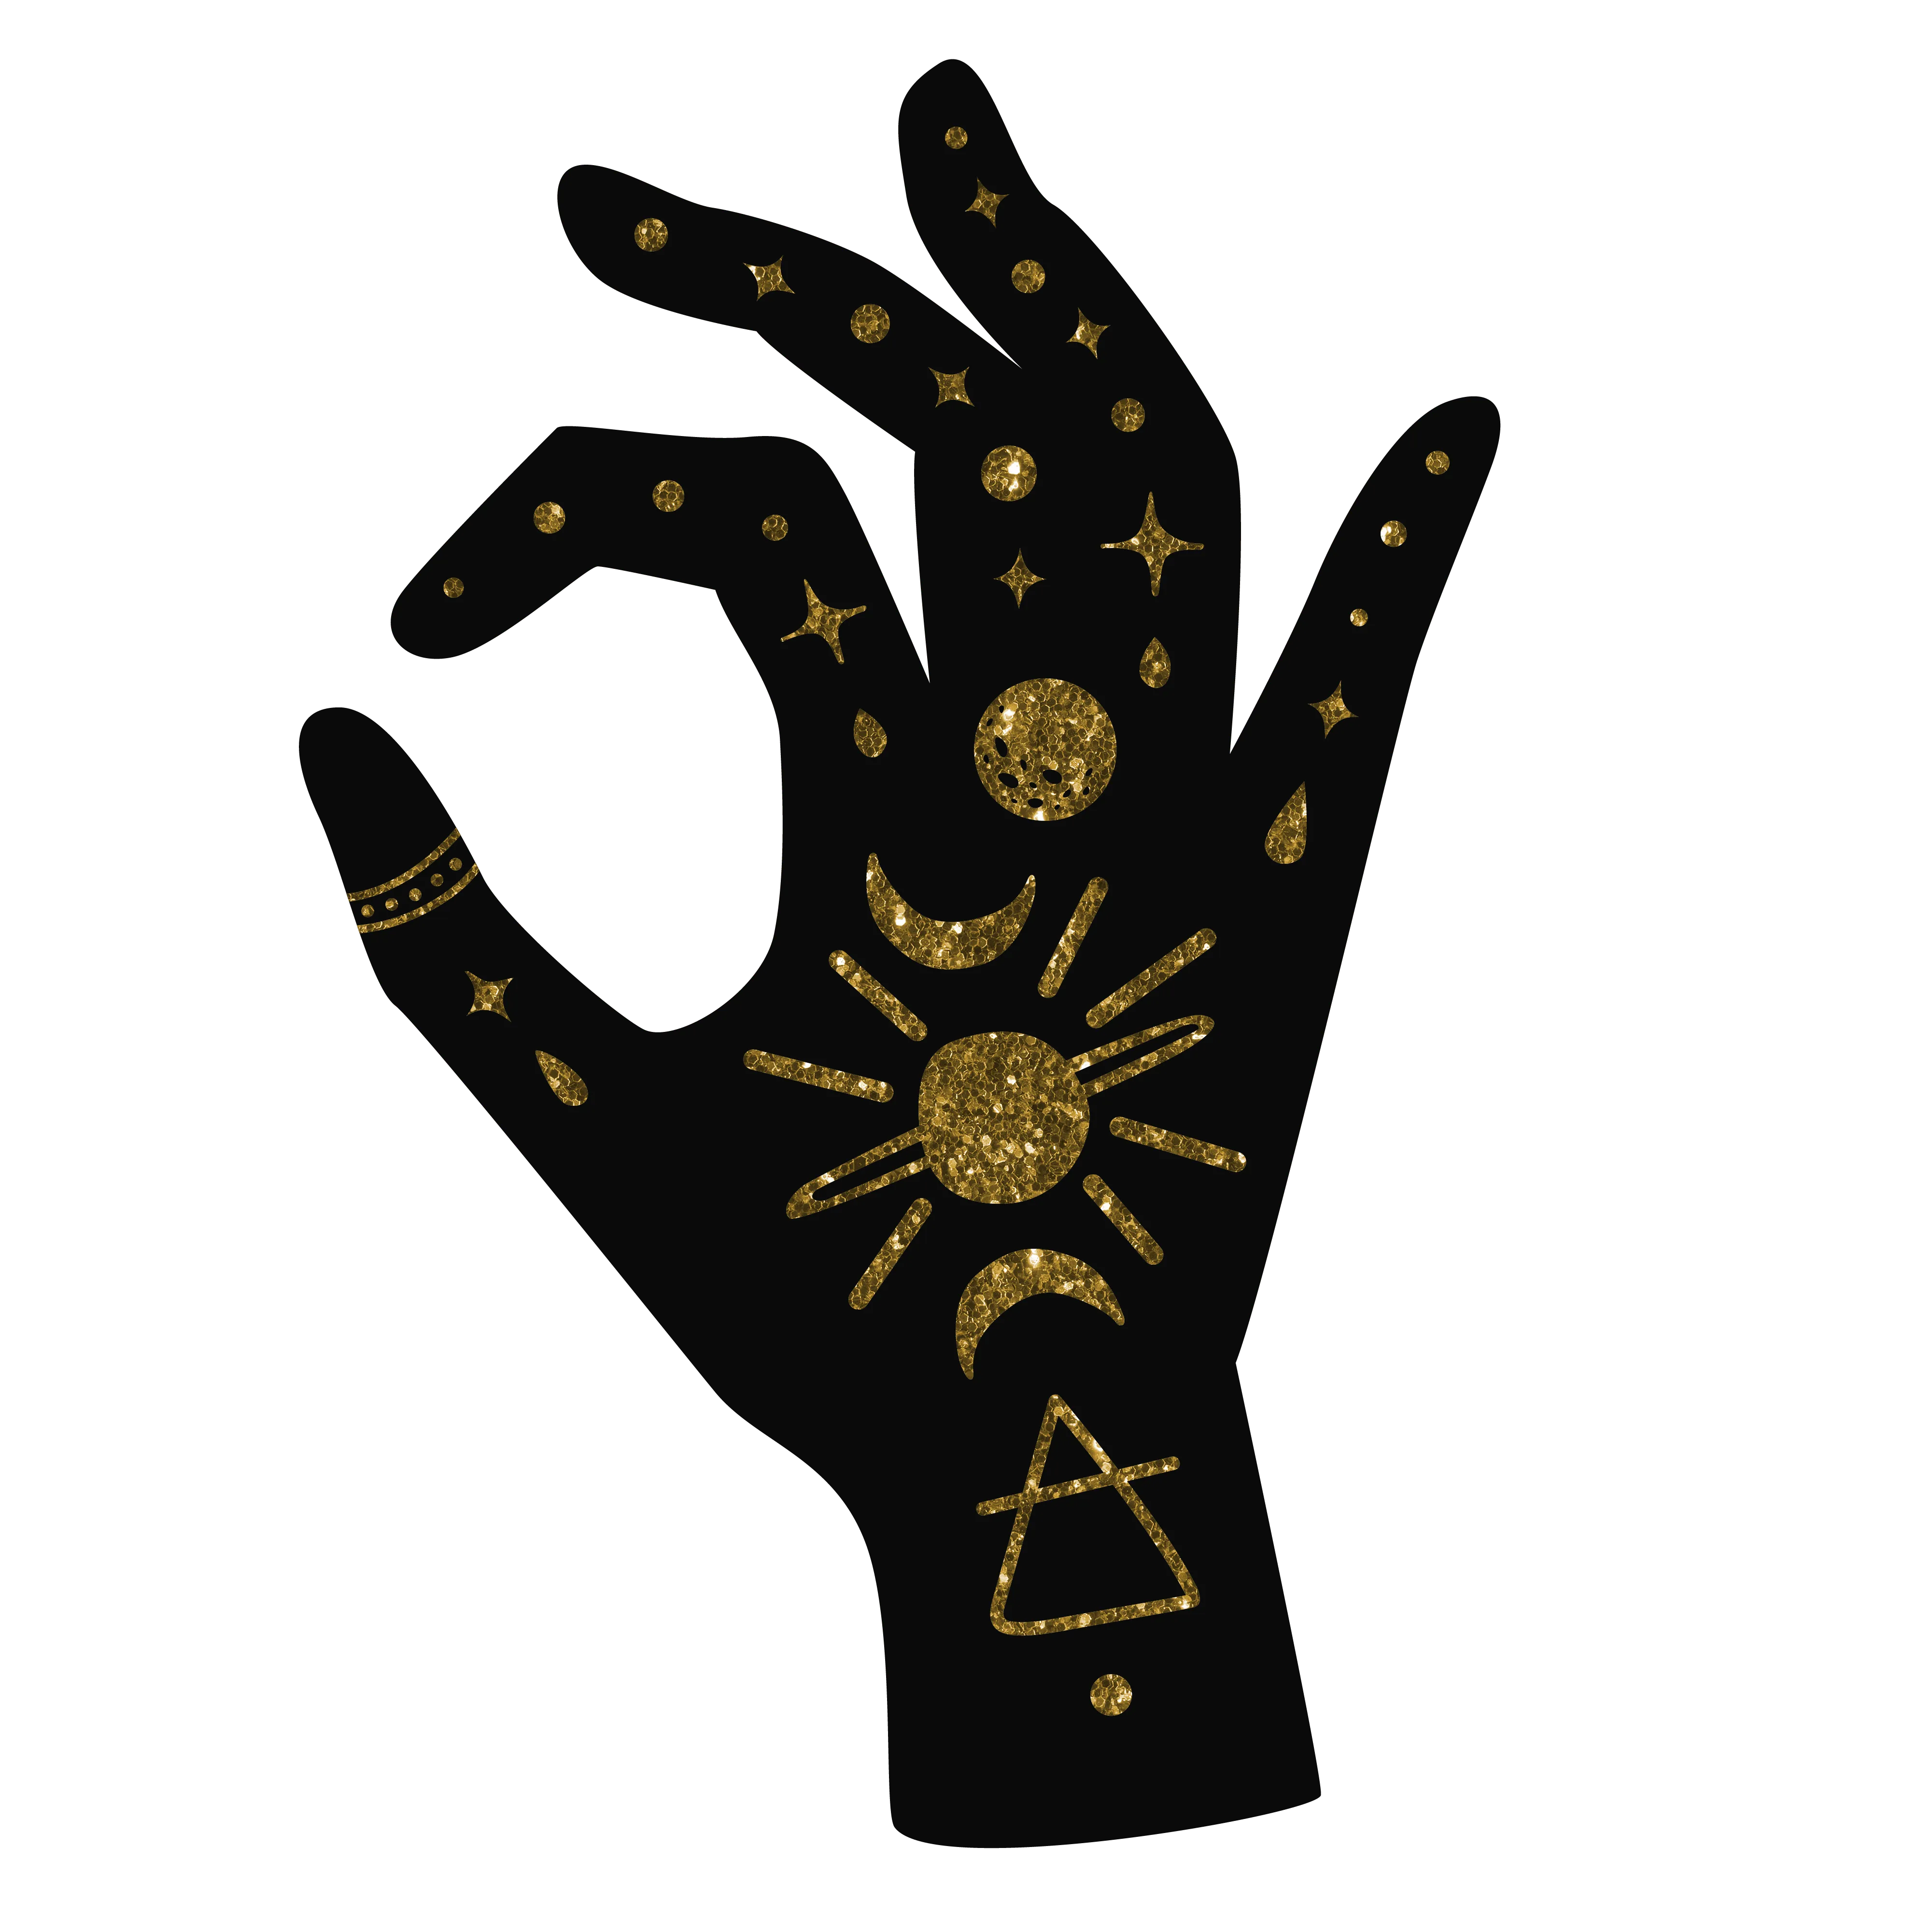 A silhouette of a right hand with gold sparkling celestial motifs.